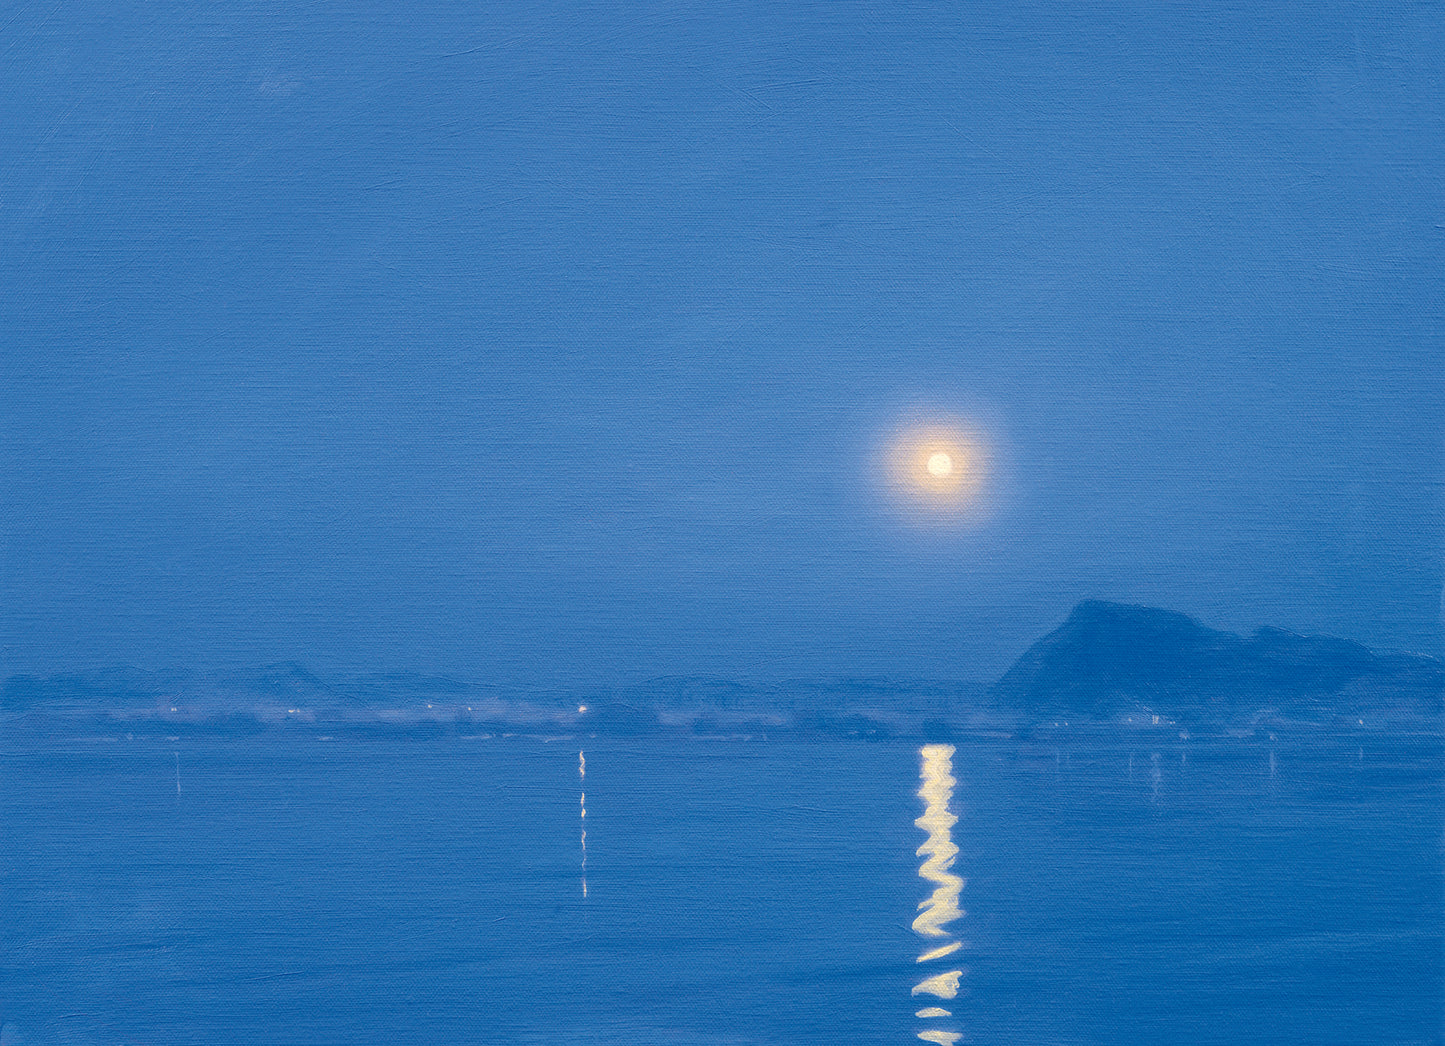 Moonlight over Udaipur. Seascape painting by Derek hare